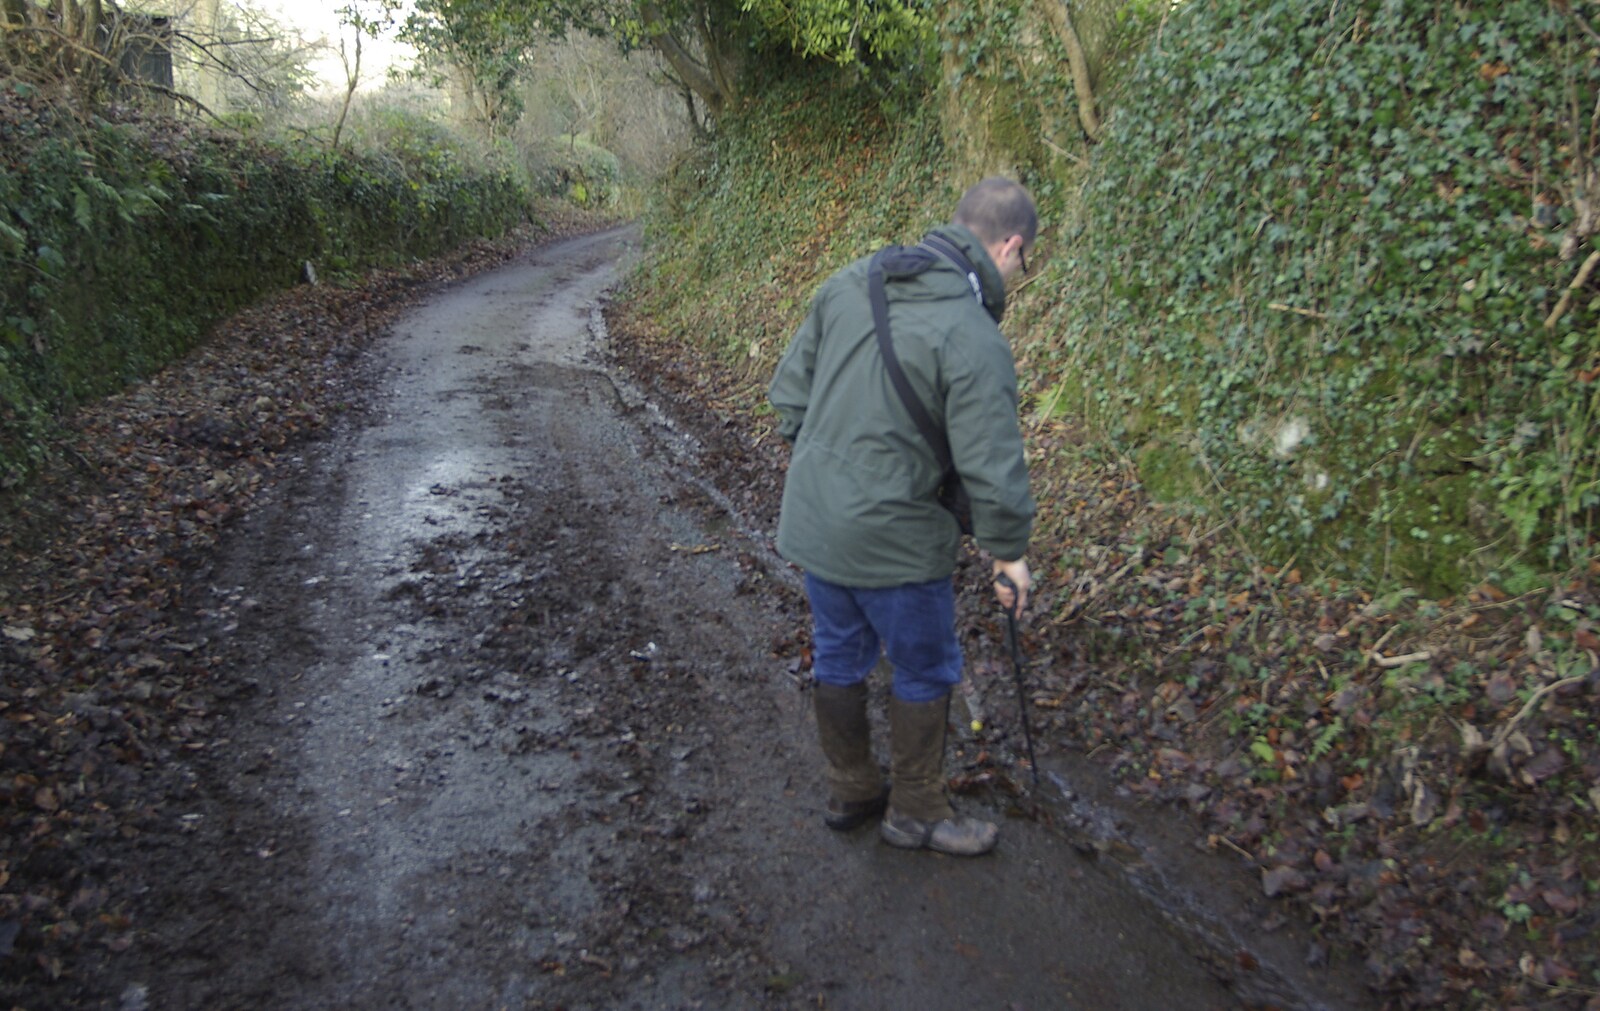 Matt clears out a leaf-clogged drainage ditch from Matt's Allotment and Meldon Hill, Chagford, Devon - 26th December 2007